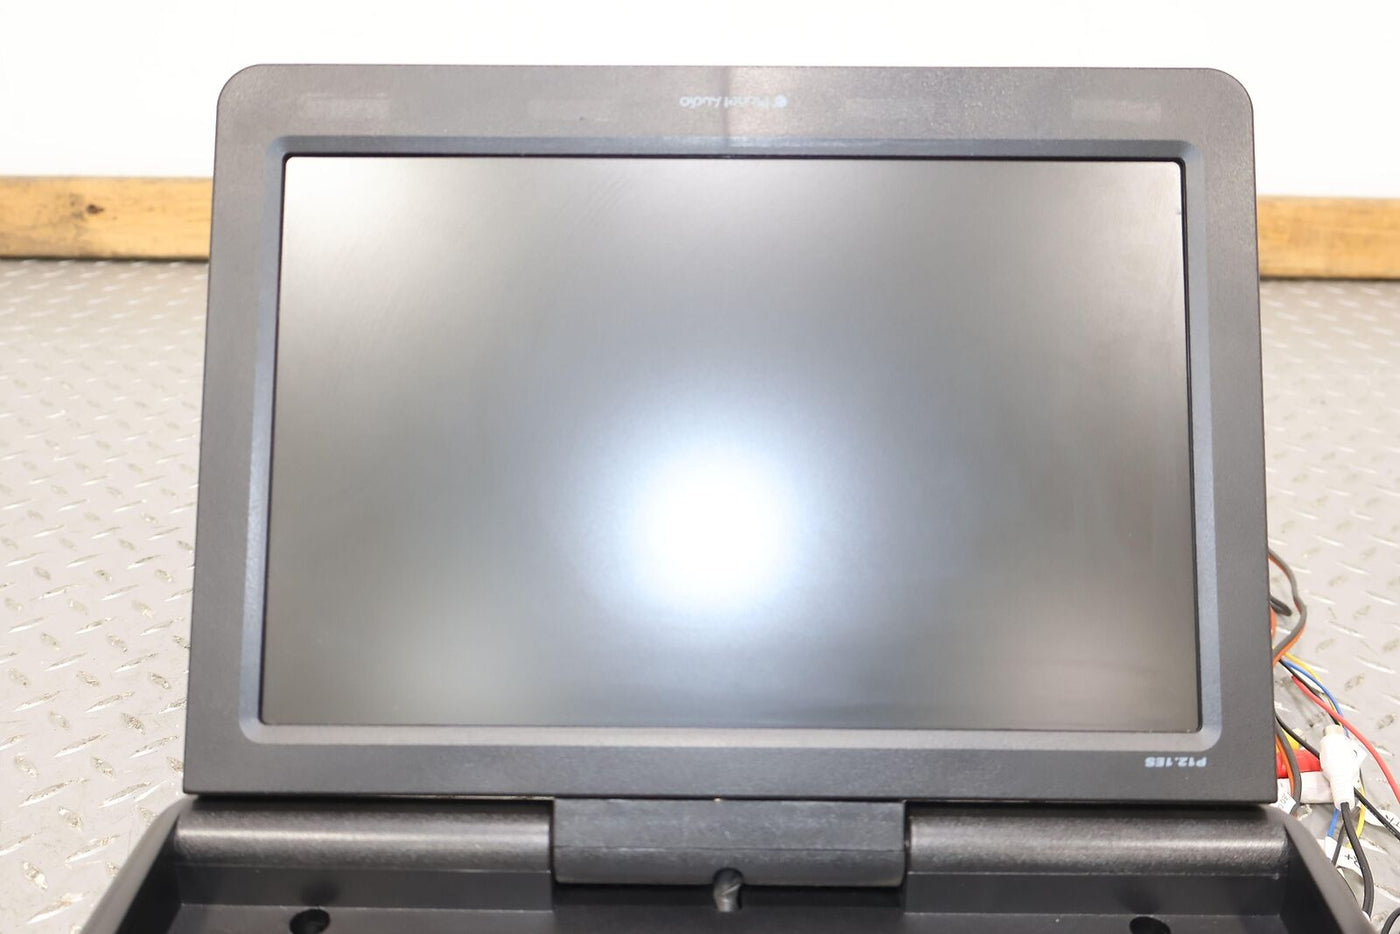 08-09 Hummer H2 Aftermarket Planet Audio Roof Mounted Screen (Unable To Test)